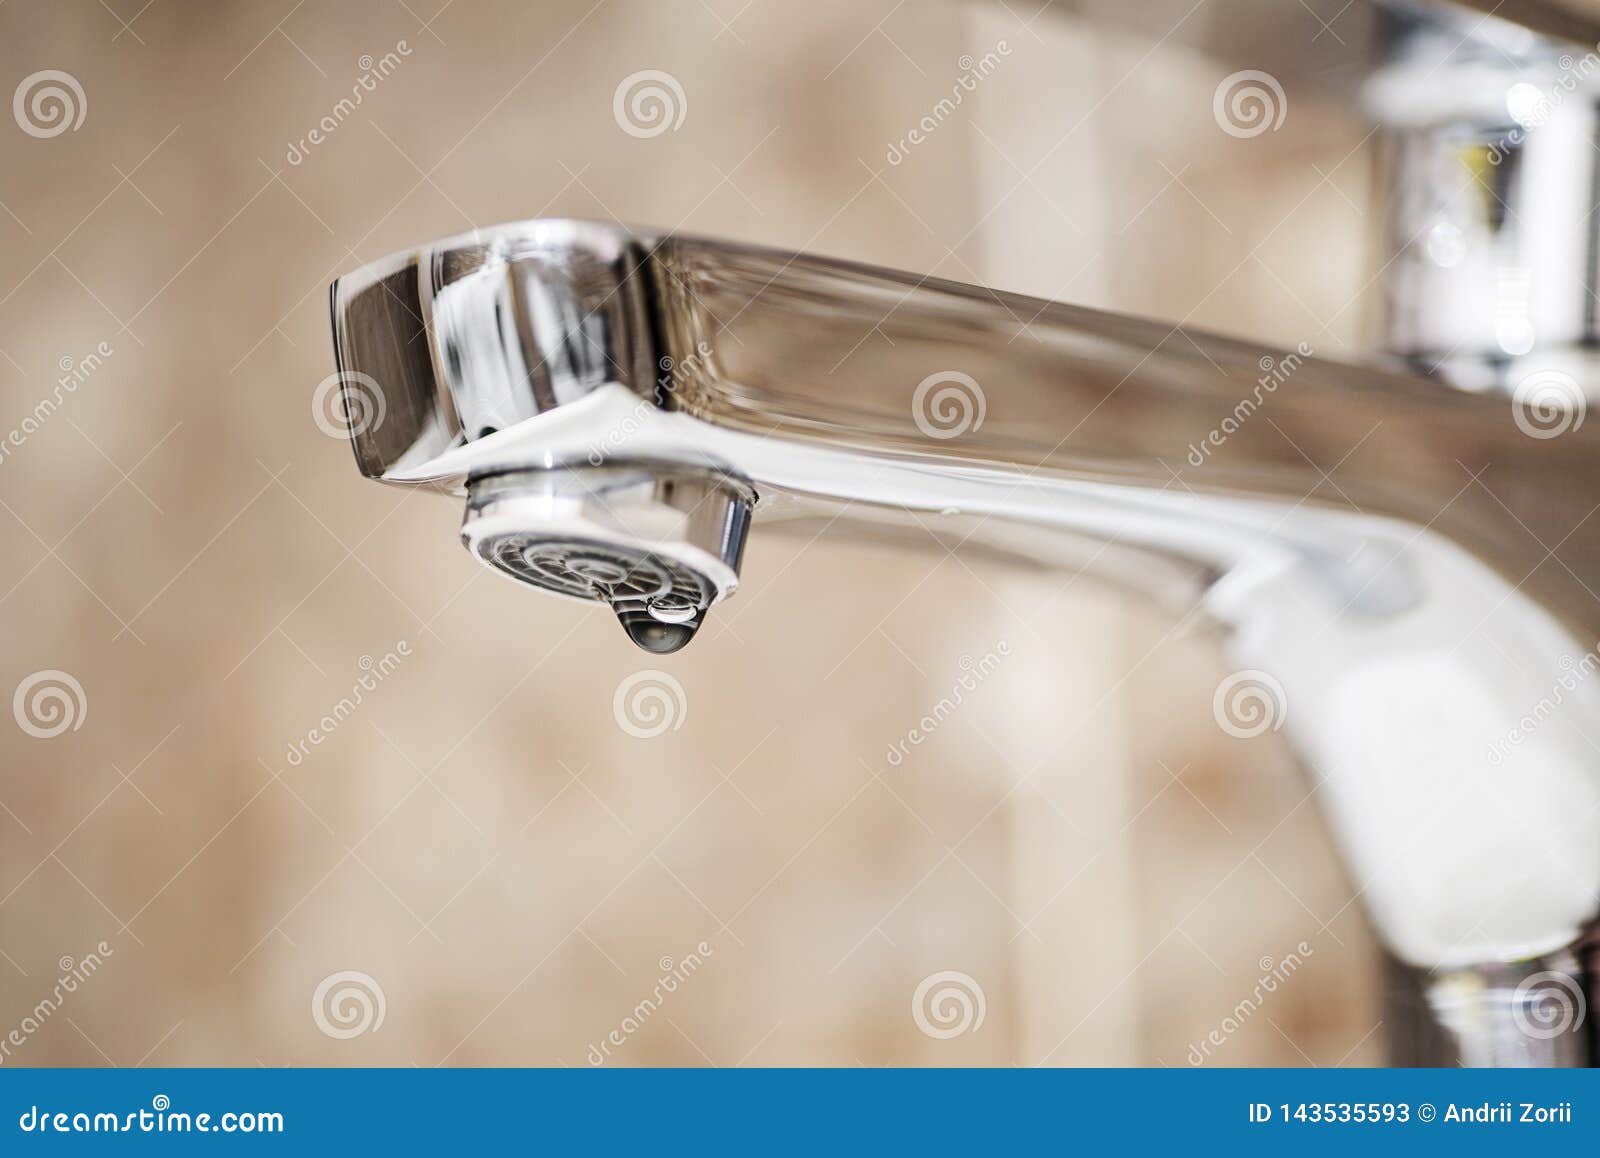 faucet with dripping water. tap closeup with dripping water-drop. water leaking, saving concept